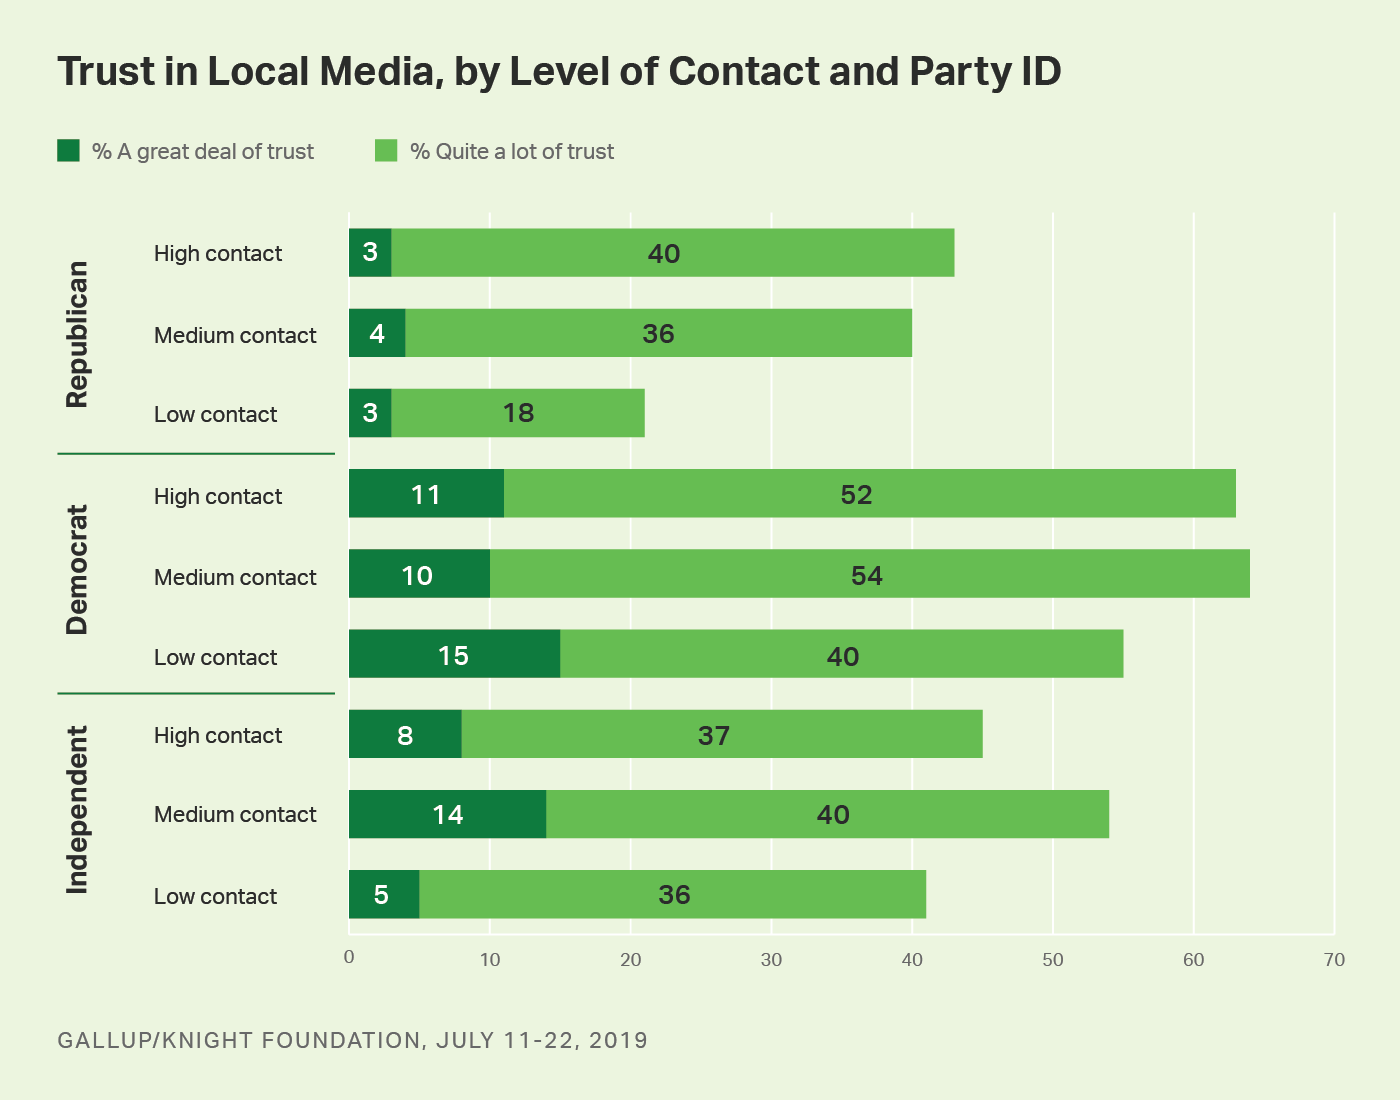 Bar graph. Americans’ level of trust and contact with local media by party affiliation. 